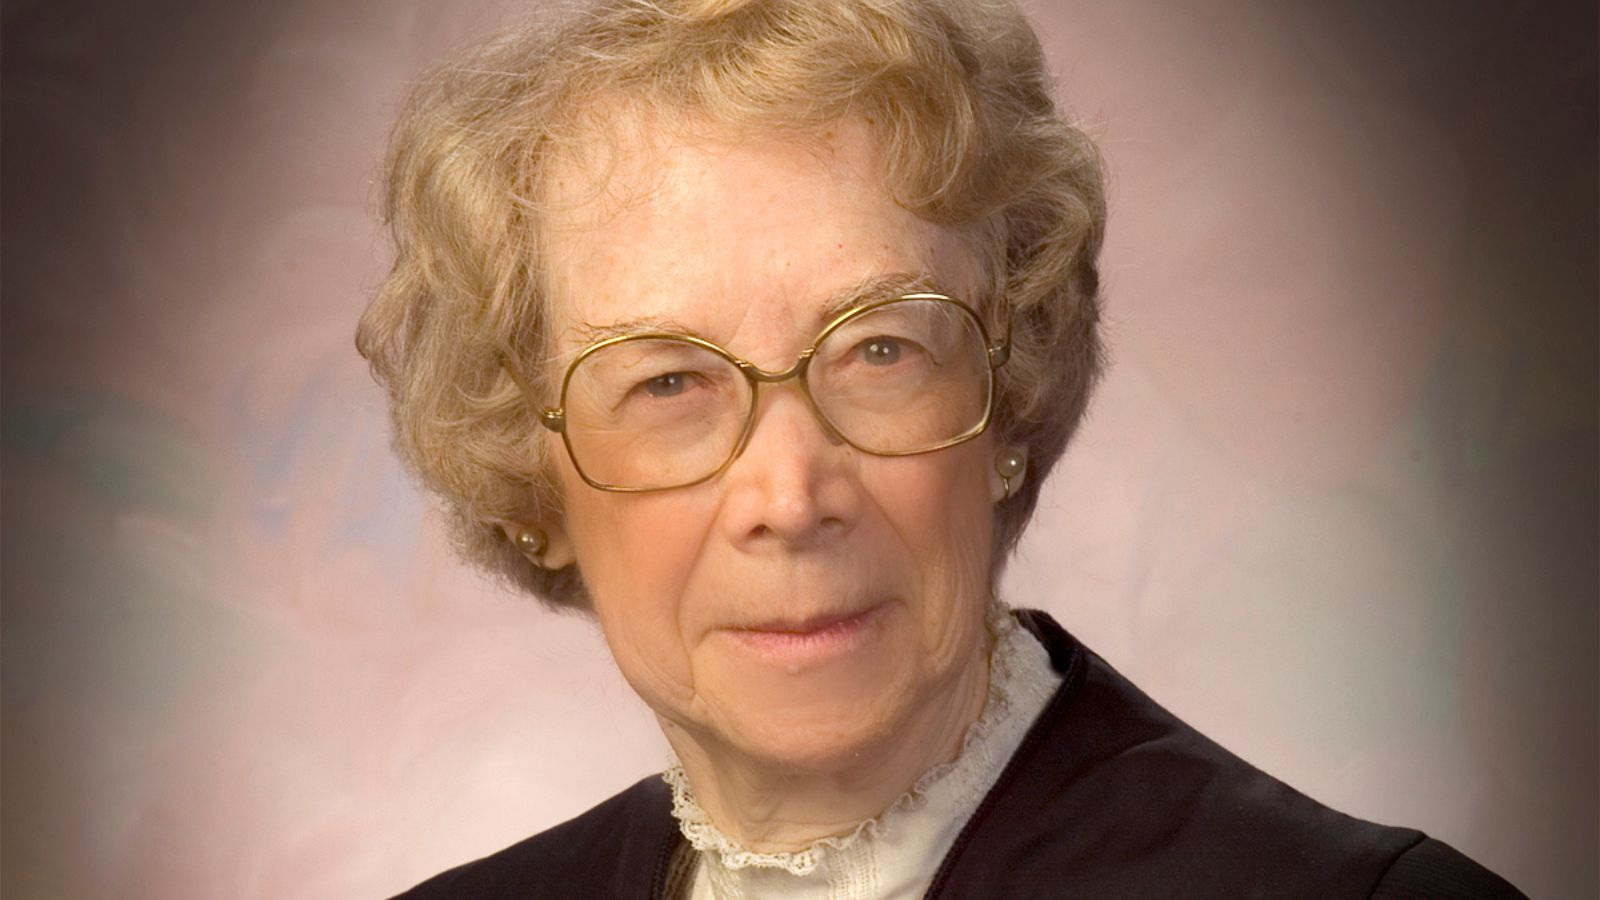 U.S. Circuit Judge Pauline Newman of the U.S. Court of Appeals for the Federal Circuit appears in an undated photo.